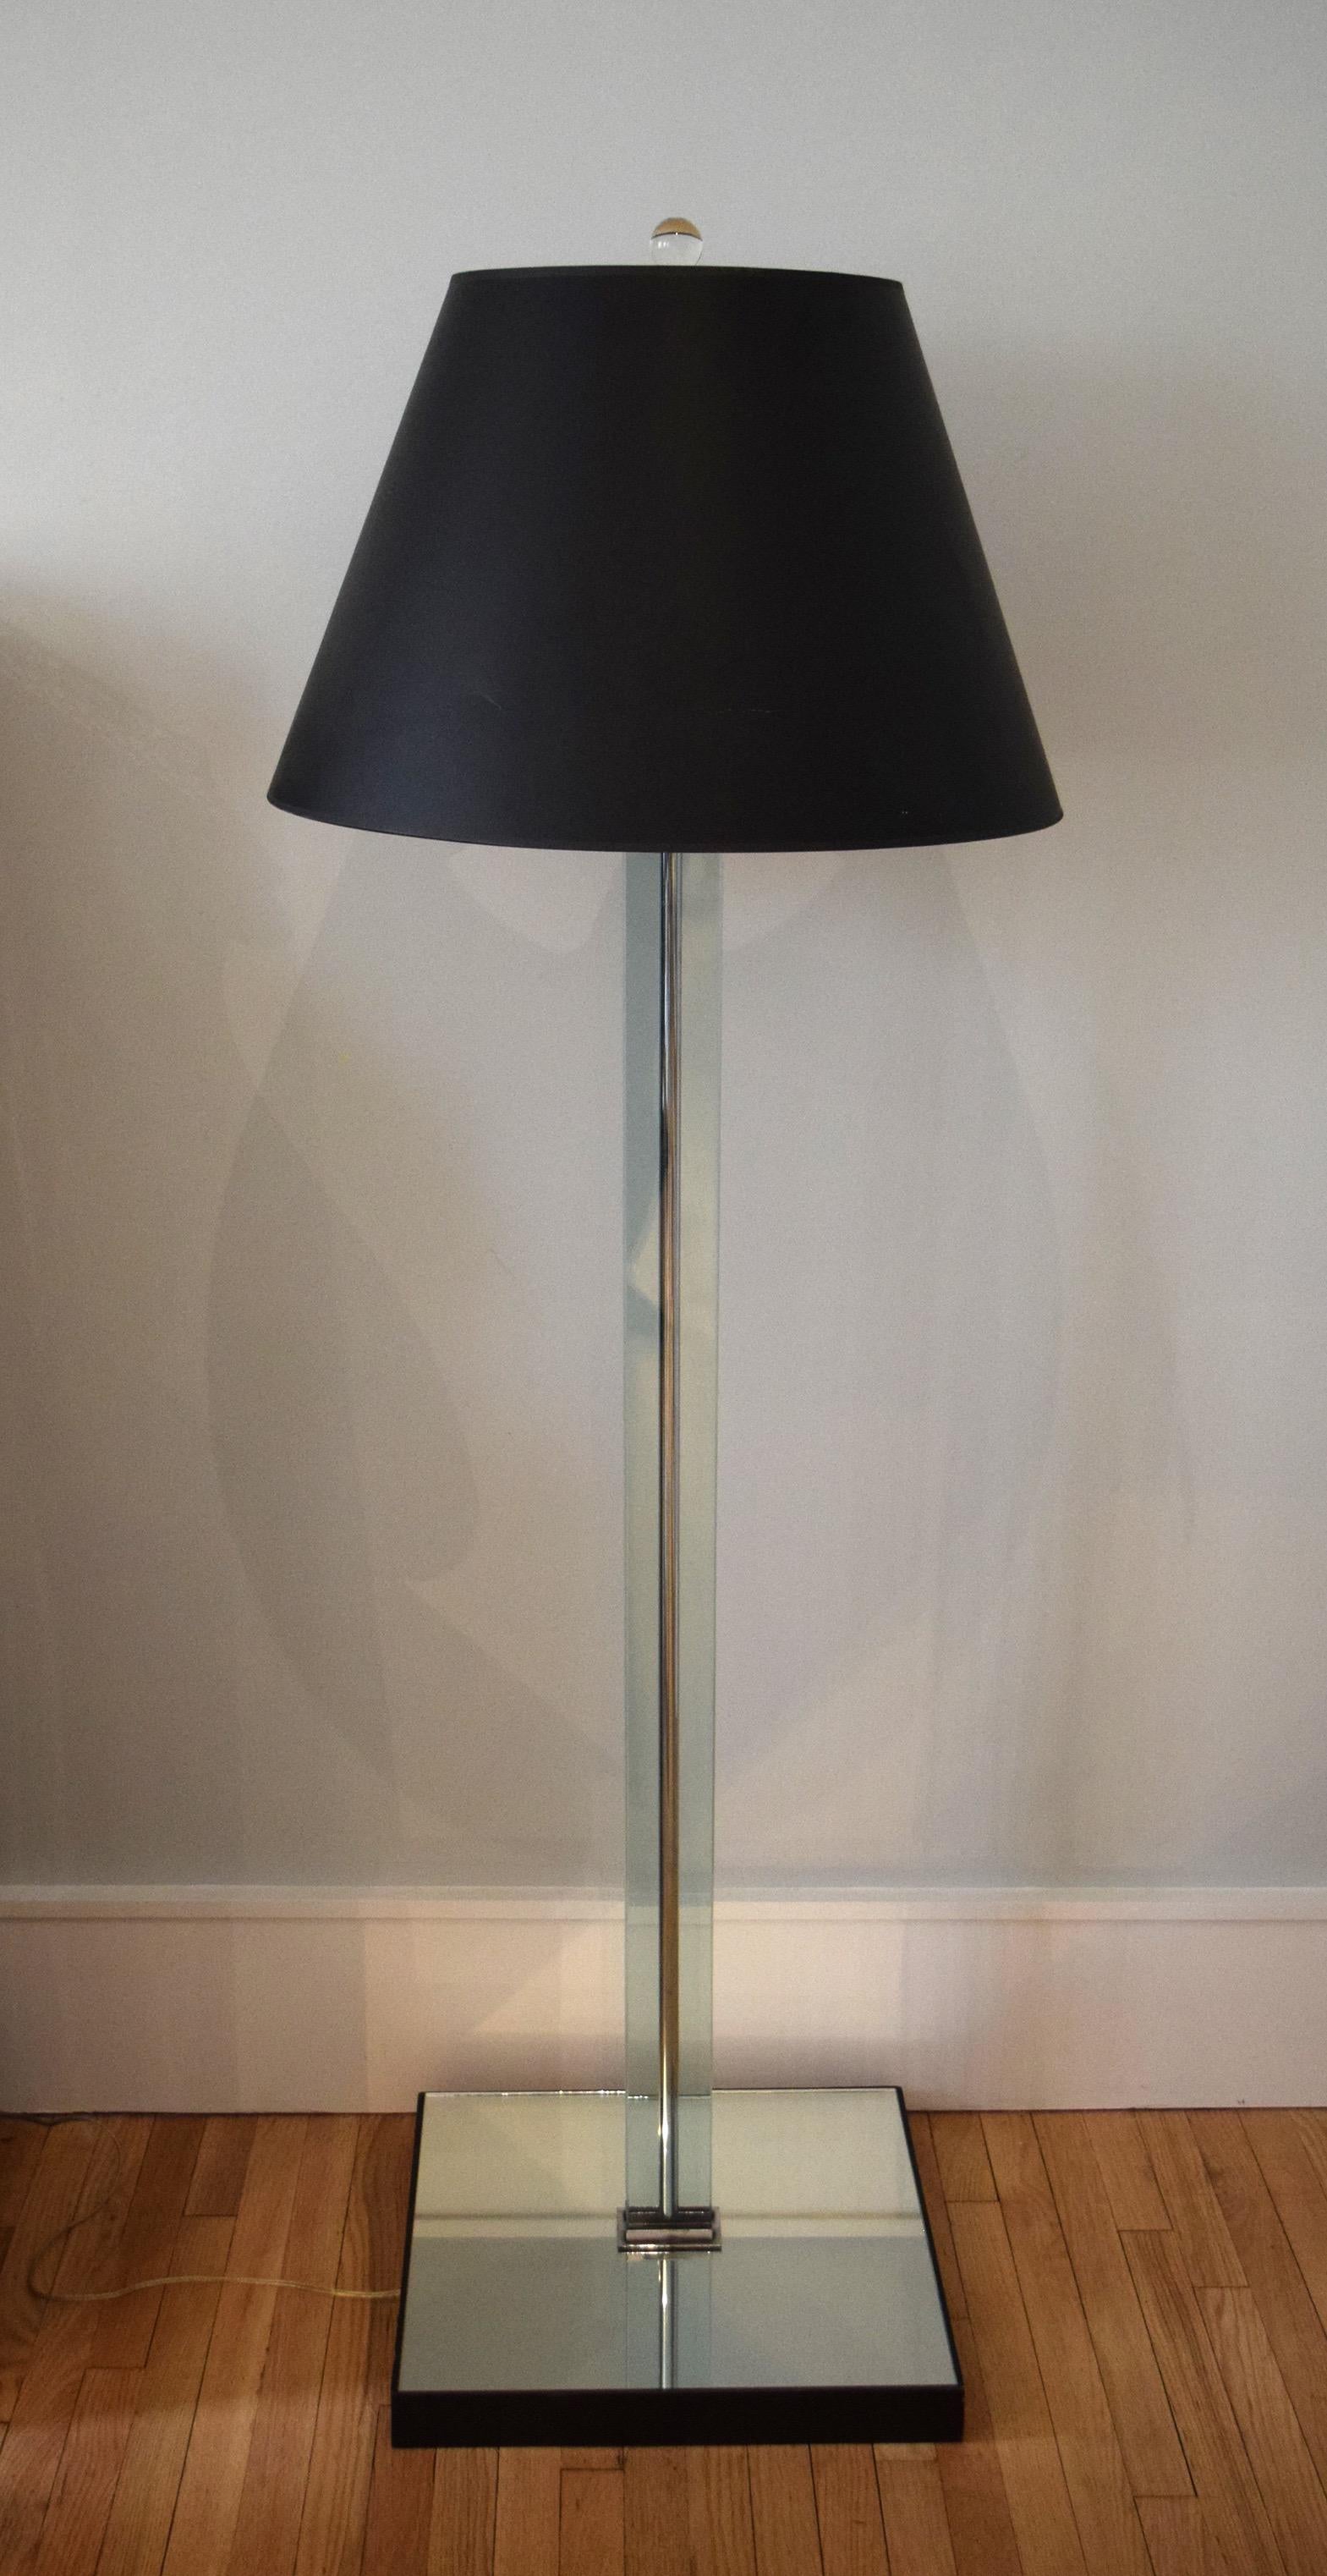 This floor lamp was designed by Jacques Adnet of Paris, or under his influence by the New York decorating firm of McMillen. It was owned by the heiress, socialite, philanthropist, and art collector Doris Duke. The lamp was presumably placed in the